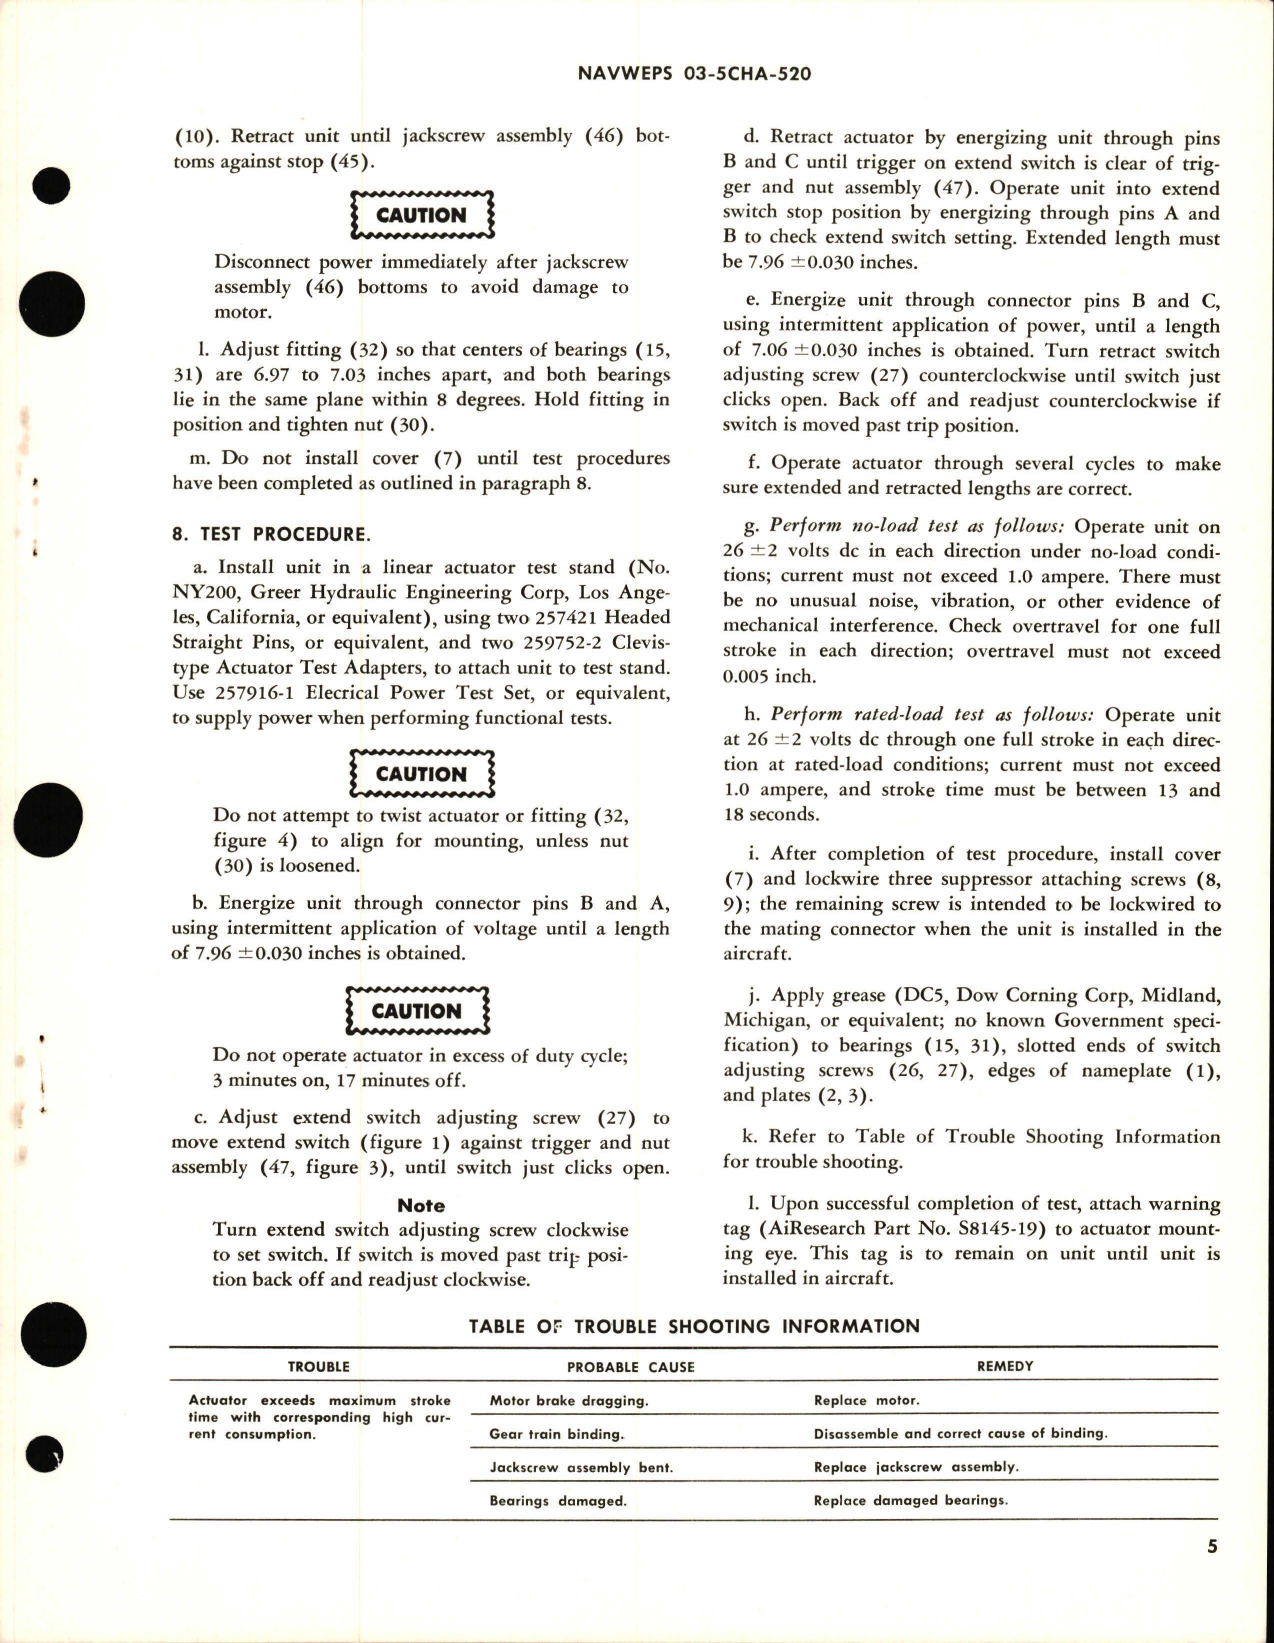 Sample page 5 from AirCorps Library document: Overhaul Instructions with Parts Breakdown Electromechanical Linear Actuator - Part 39622-1